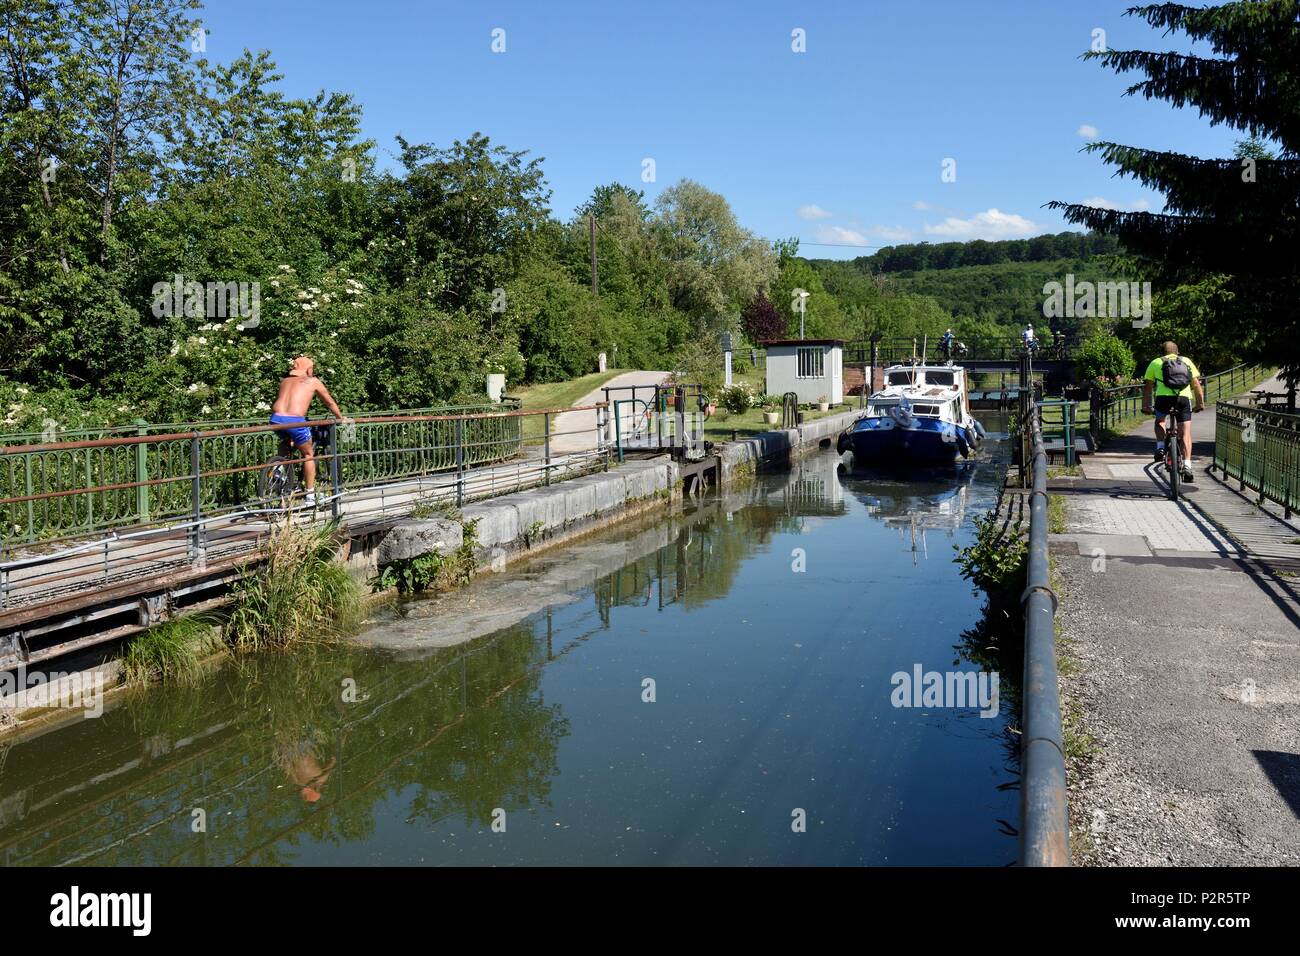 France, Doubs, Allenjoie, canal bridge, the Rhone-Rhine canal crosses the Allan and joins the Haute Saone canal, a barge comes out of the lock, bike paths, bicycles Stock Photo